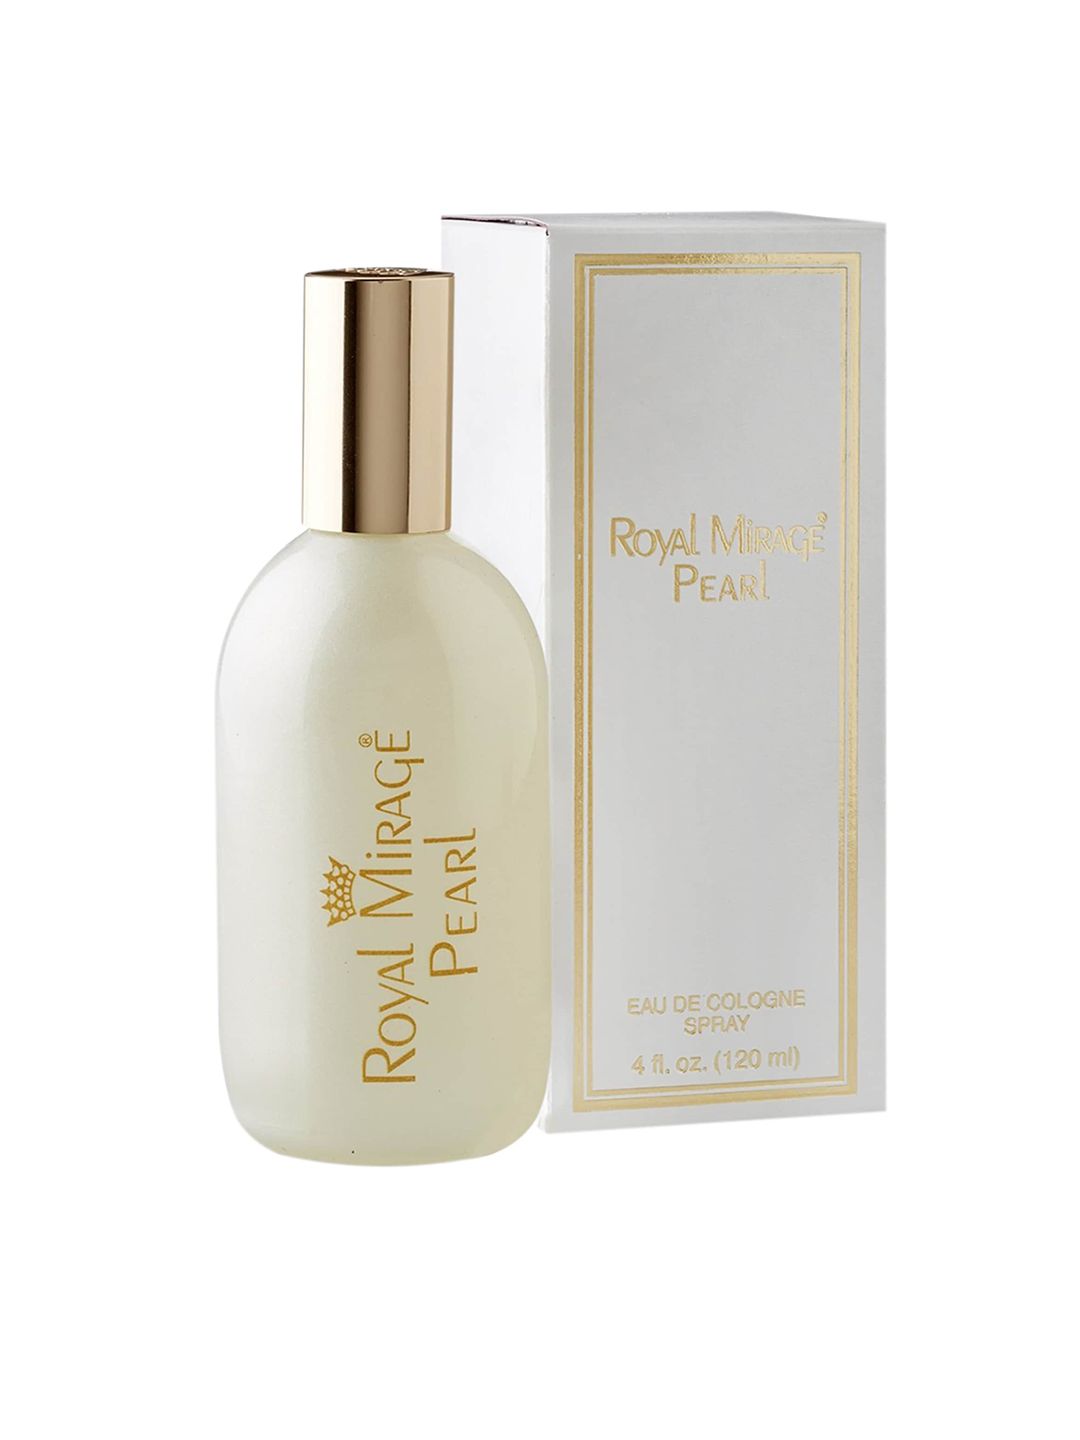 Royal Mirage Pearl Long Lasting Eau De Cologne Spray 120 ml Price in India